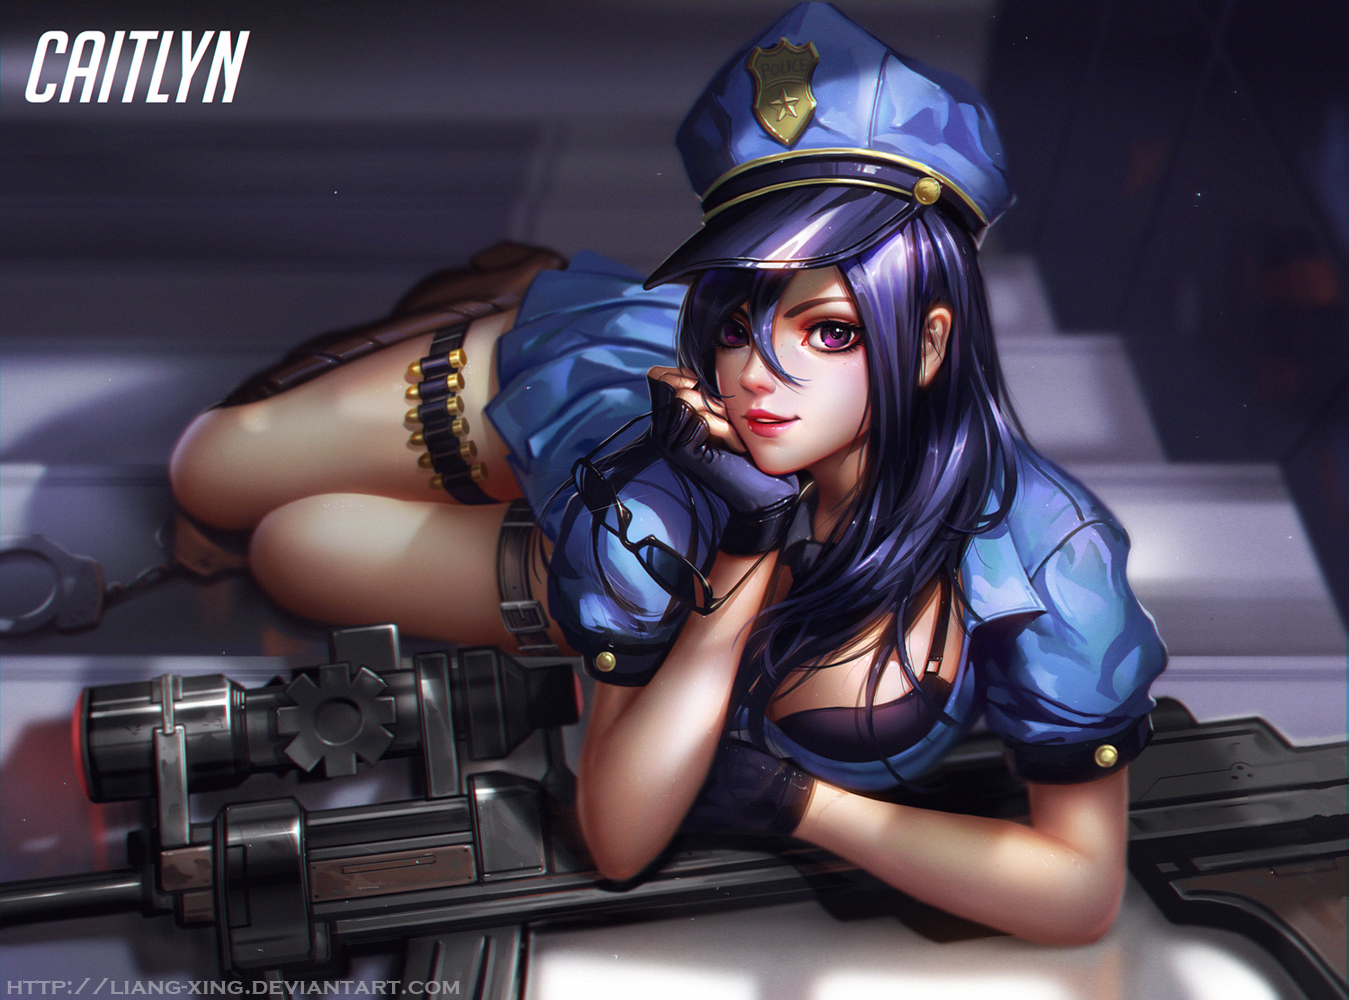 General 1349x1000 Jason Liang drawing League of Legends women Caitlyn (League of Legends) open clothes police costume purple eyes weapon sniper rifle PC gaming video game girls hat women with hats girls with guns looking at viewer video game art